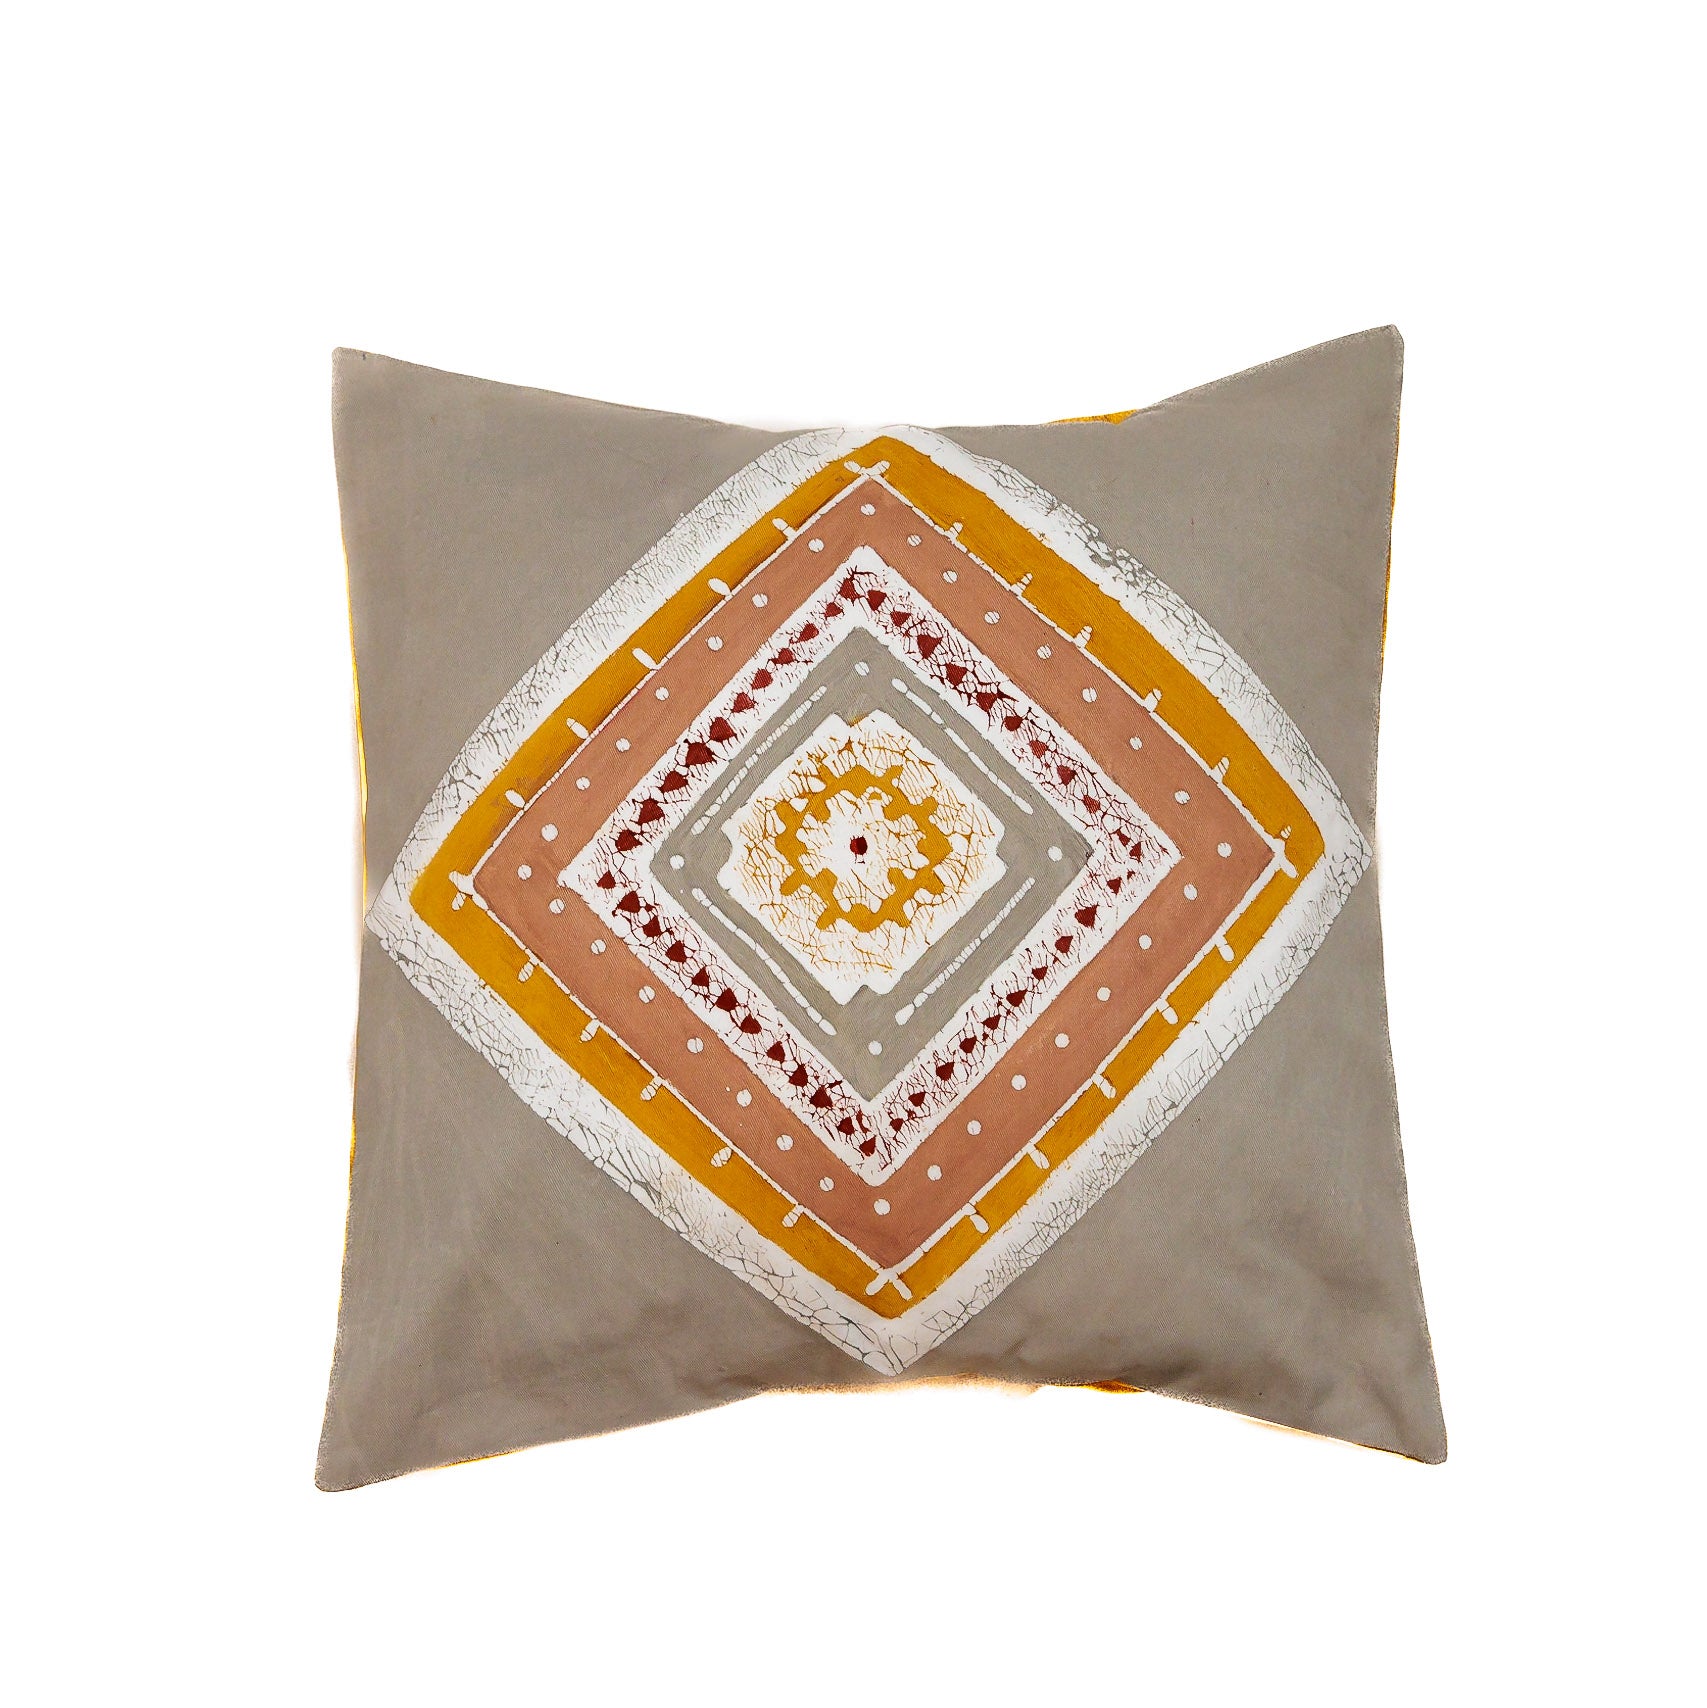 Atlas Diamond Cushion Cover - Handmade by TRIBAL TEXTILES - Handcrafted Home Decor Interiors - African Made